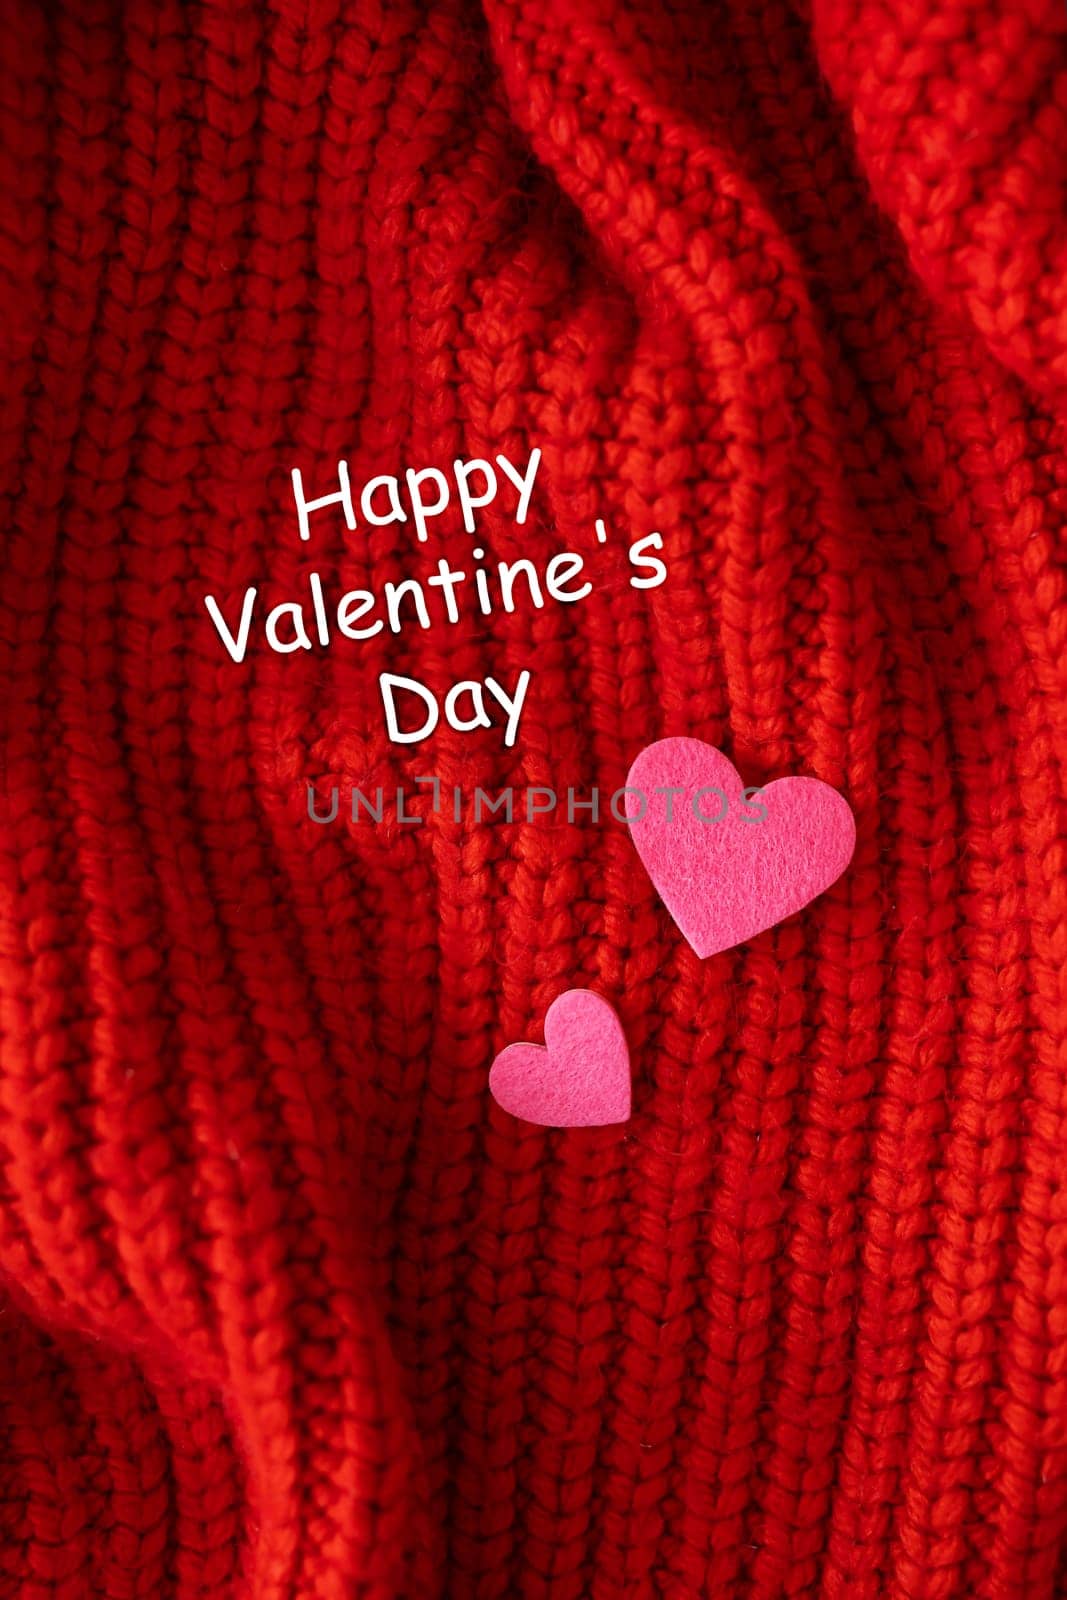 Decorative pink heart on a red knitted background, top view. Lettering Happy Valentine's Day. by sfinks